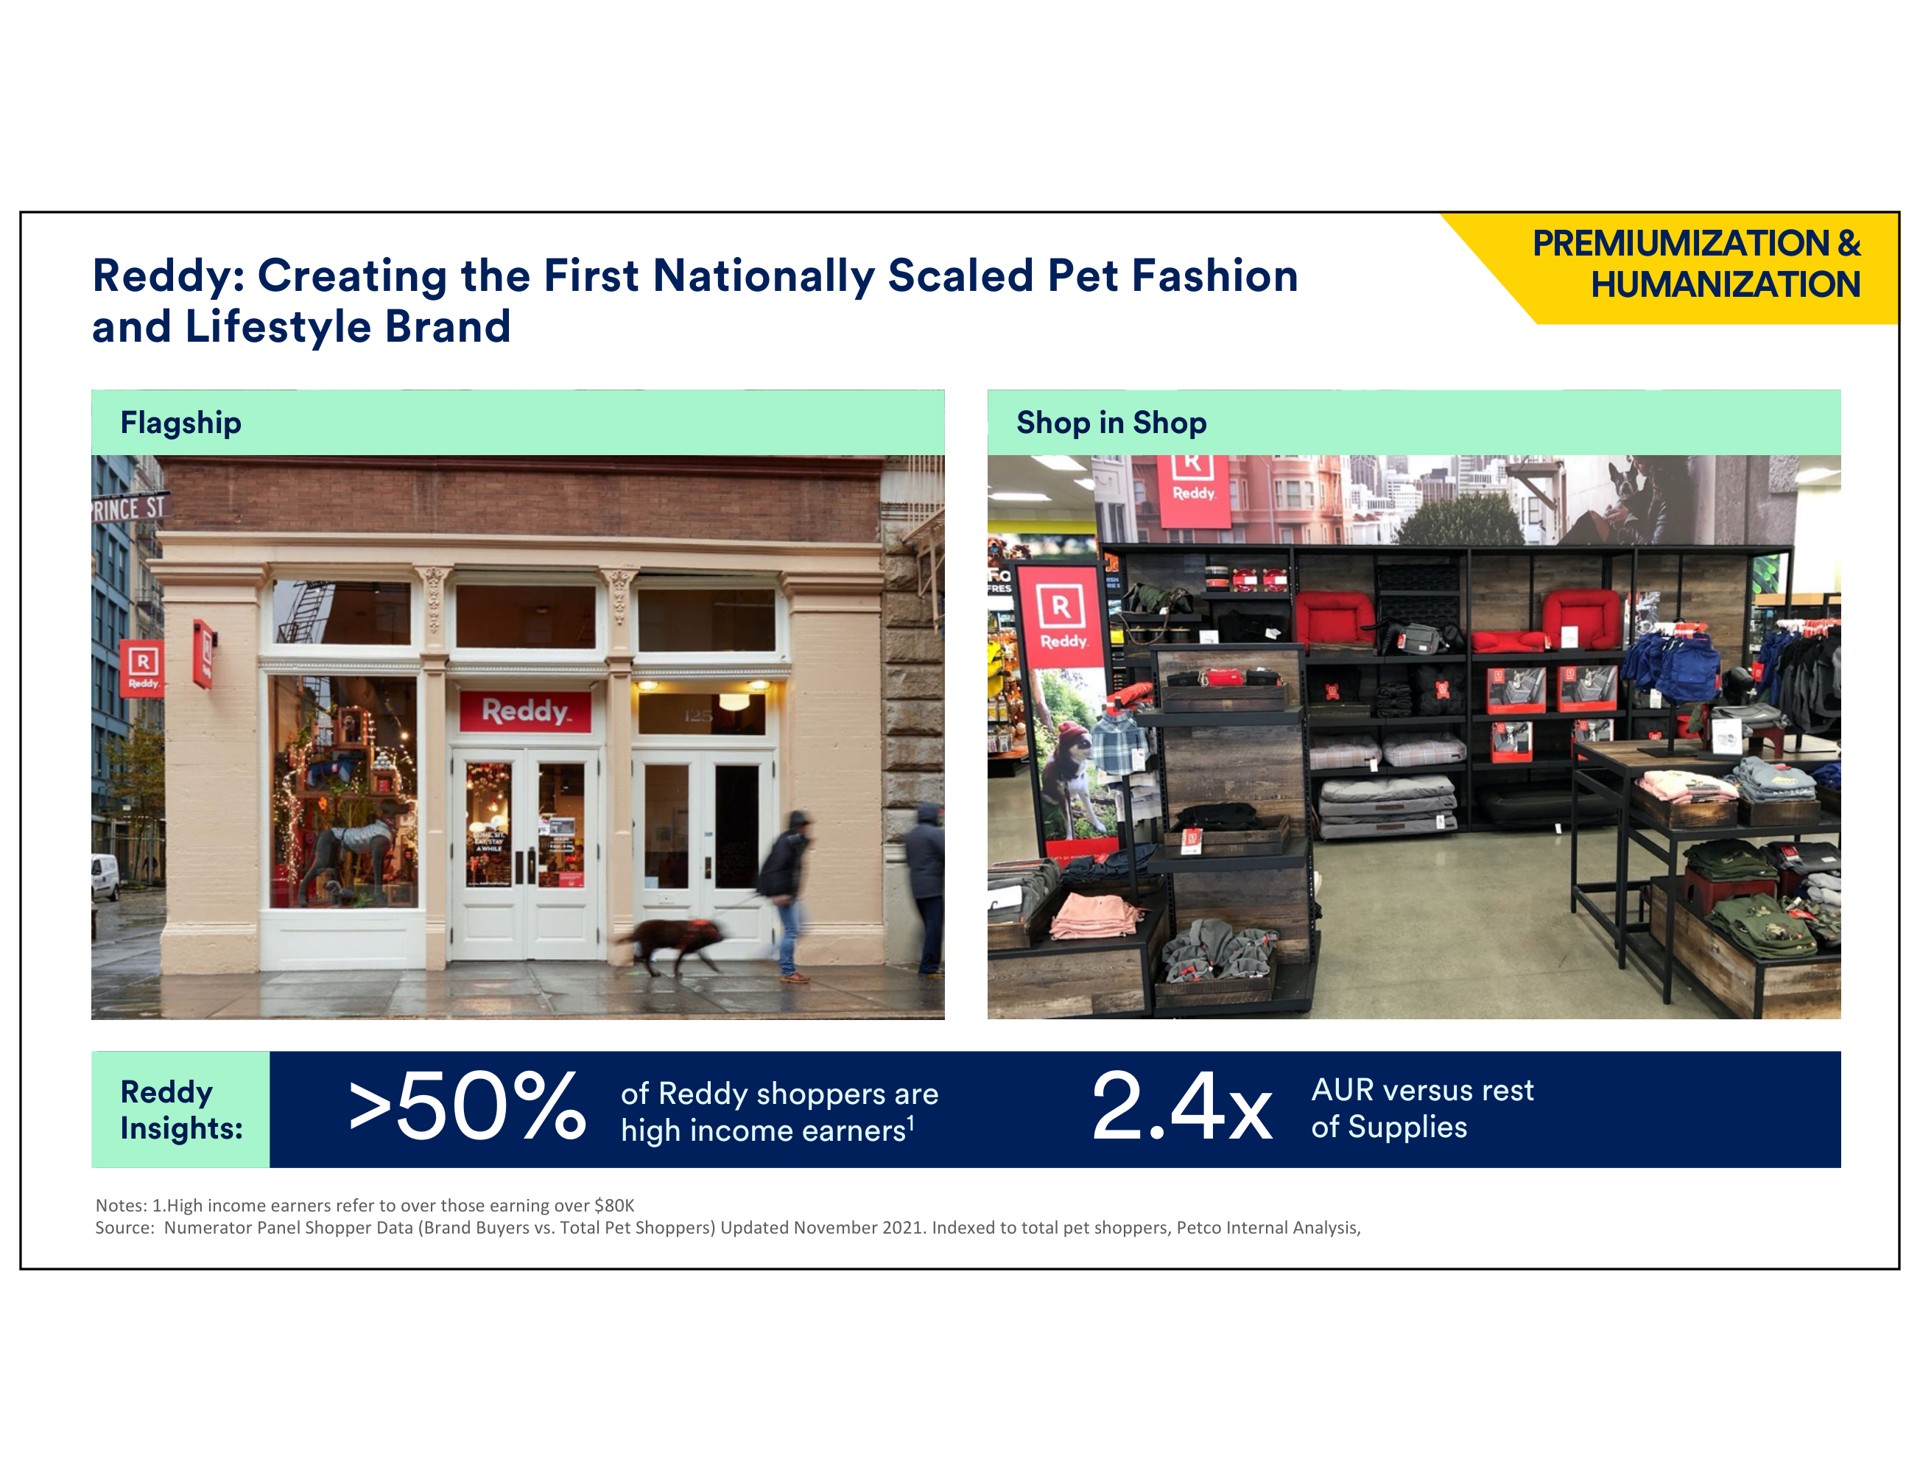 reddy creating the first nationally scaled pet fashion and brand humanization source numerator panel shopper data buyers total shoppers updated indexed to total shoppers internal analysis of shoppers are versus rest of supplies high income earners notes high income earners refer to over those earning over insights | Petco